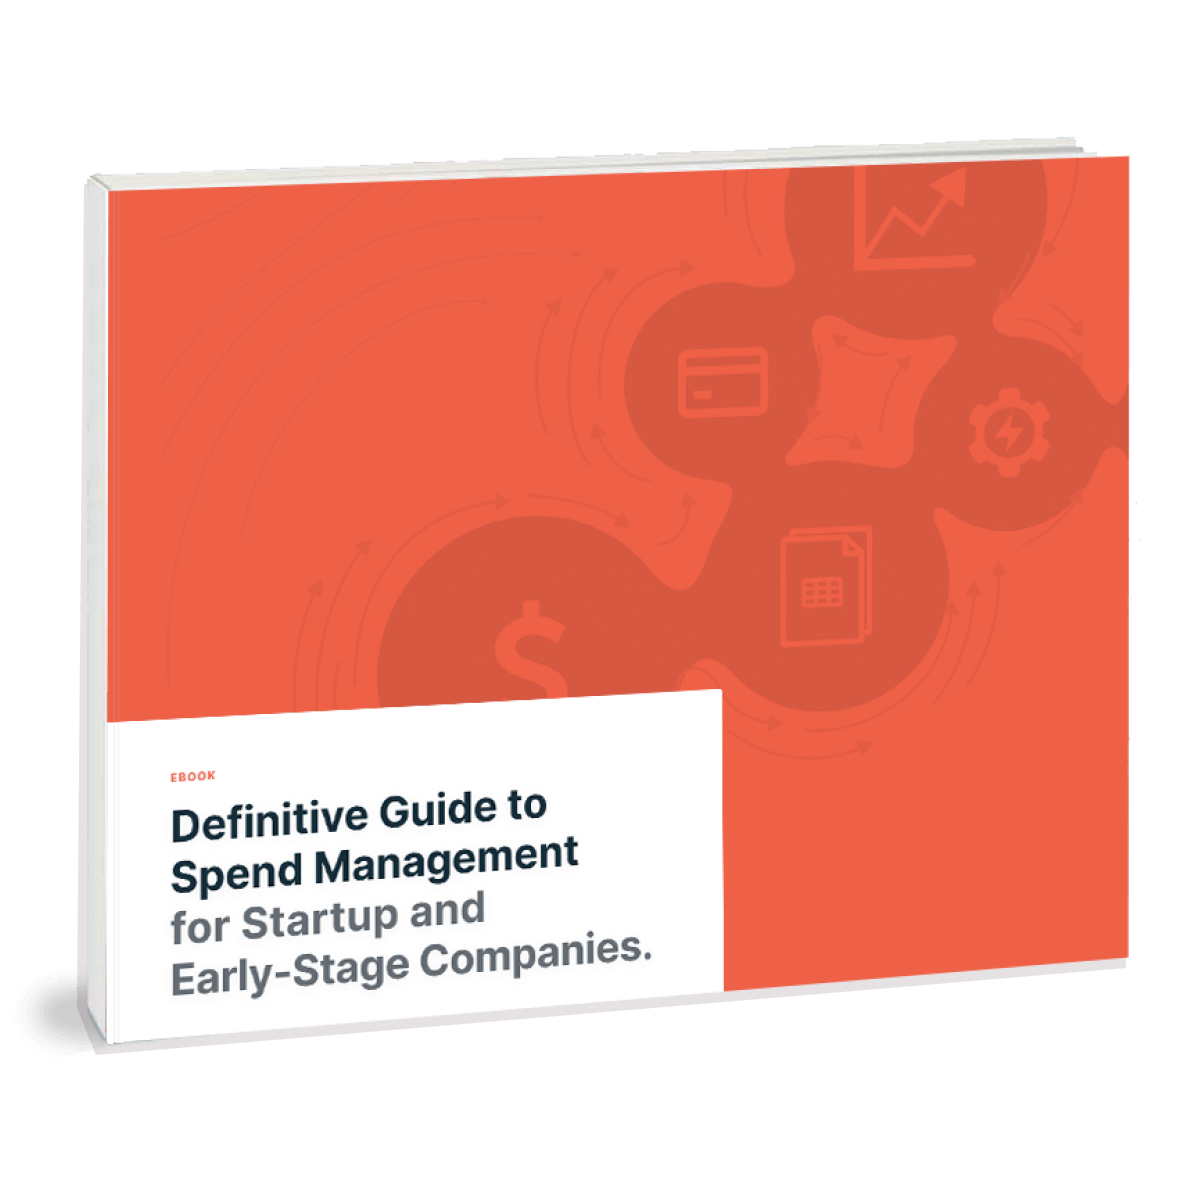 Definitive Guide to Spend Management for Startup and Early-Stage Companies.